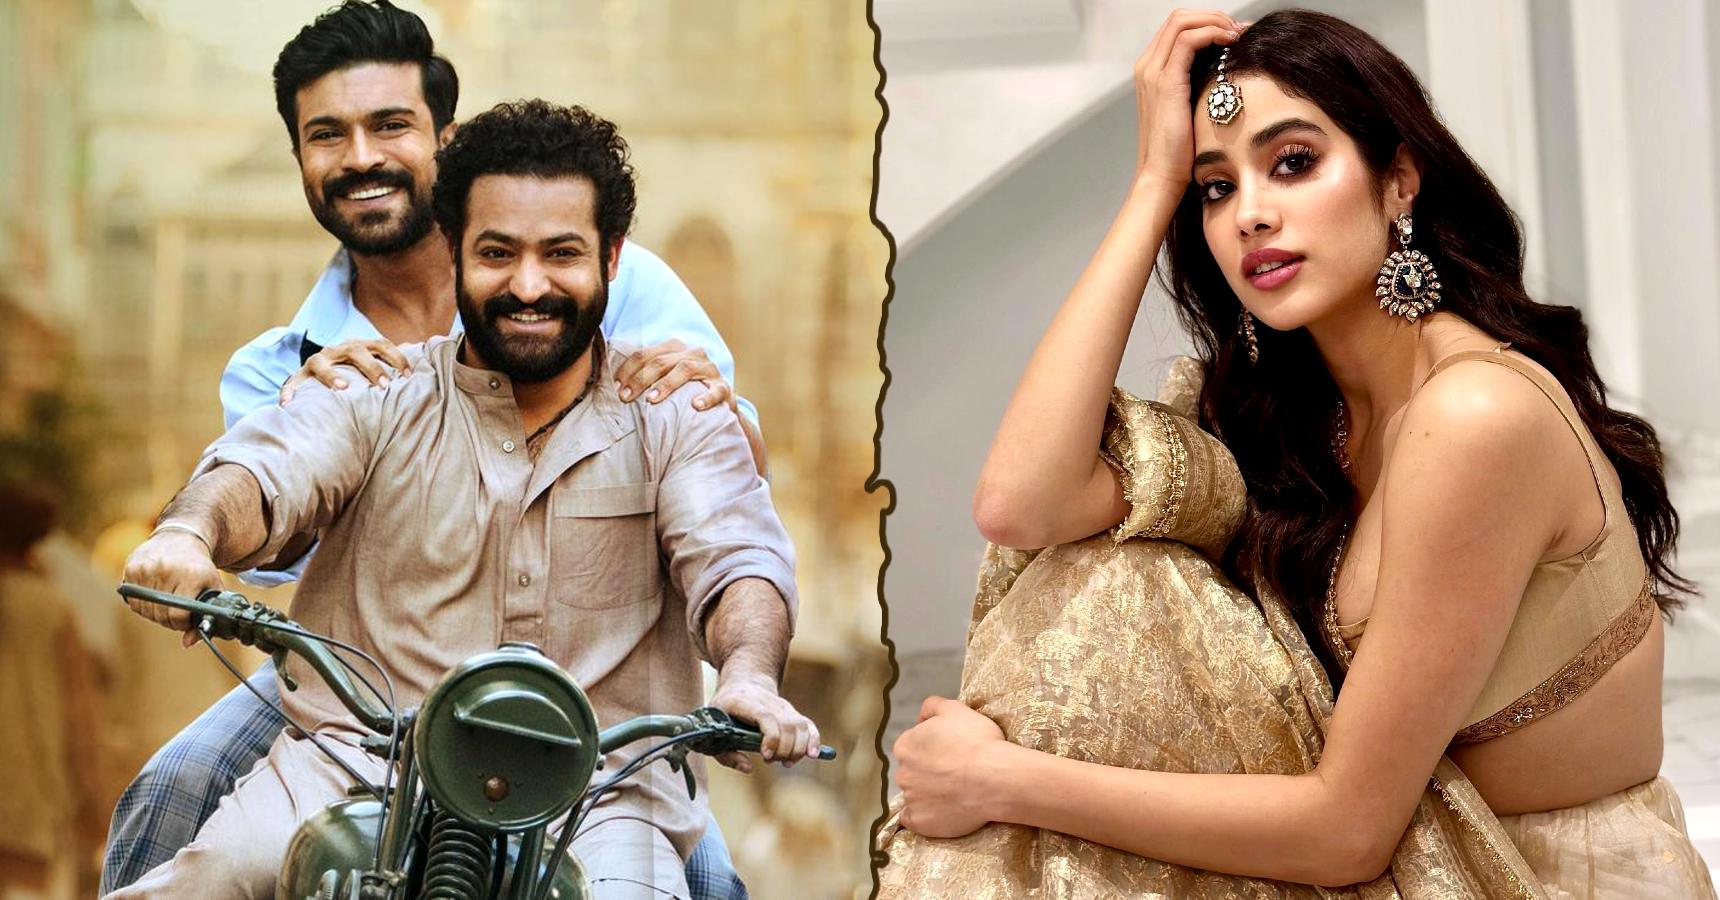 Janhavi Kapoor ready for tollywood debut with RRR starer Jr NTR or Ram Charan